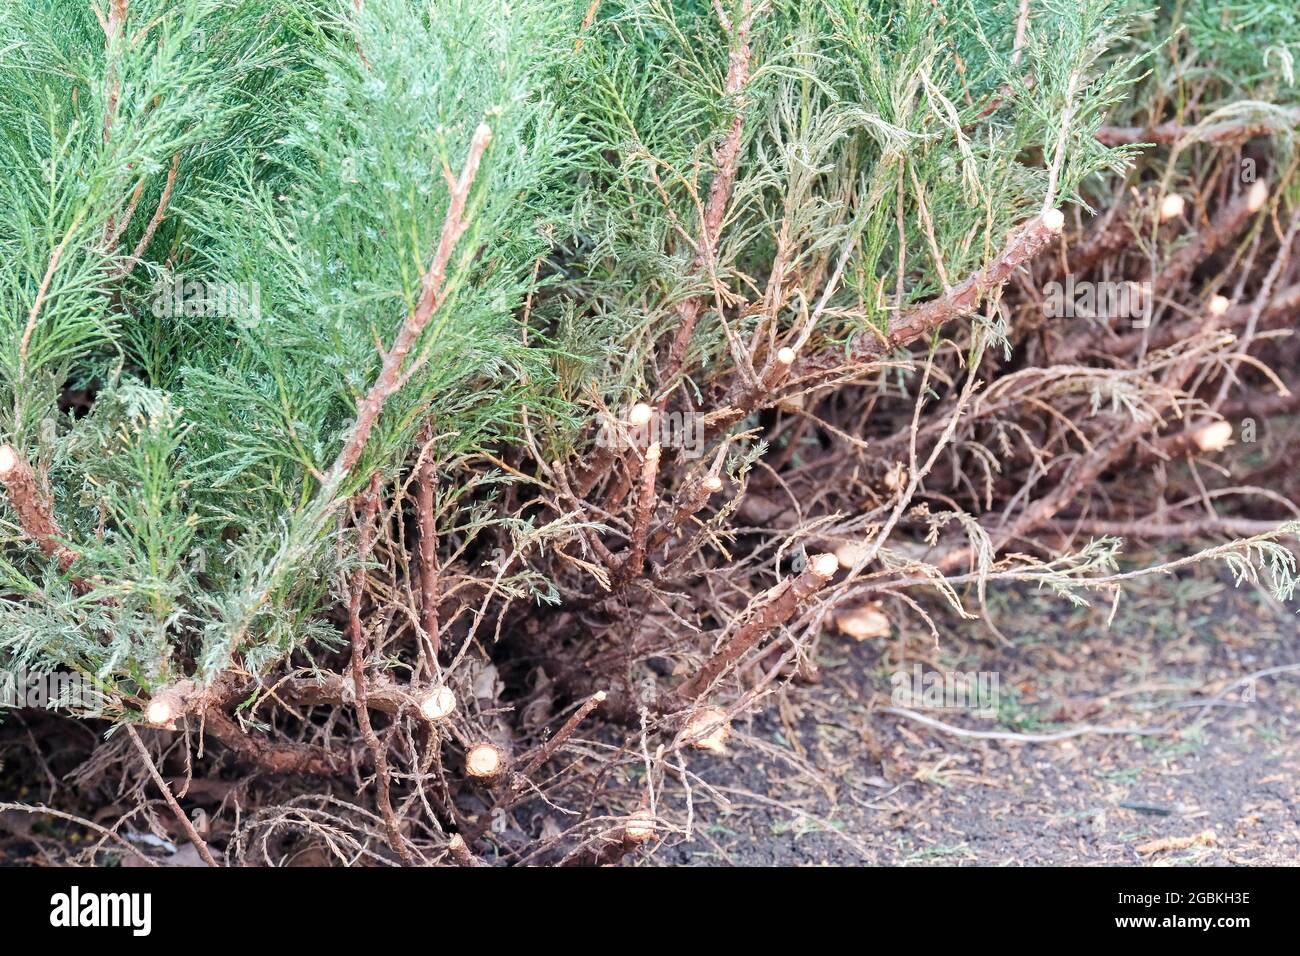 Cut branches of a juniper. Gardening work, no people. Stock Photo